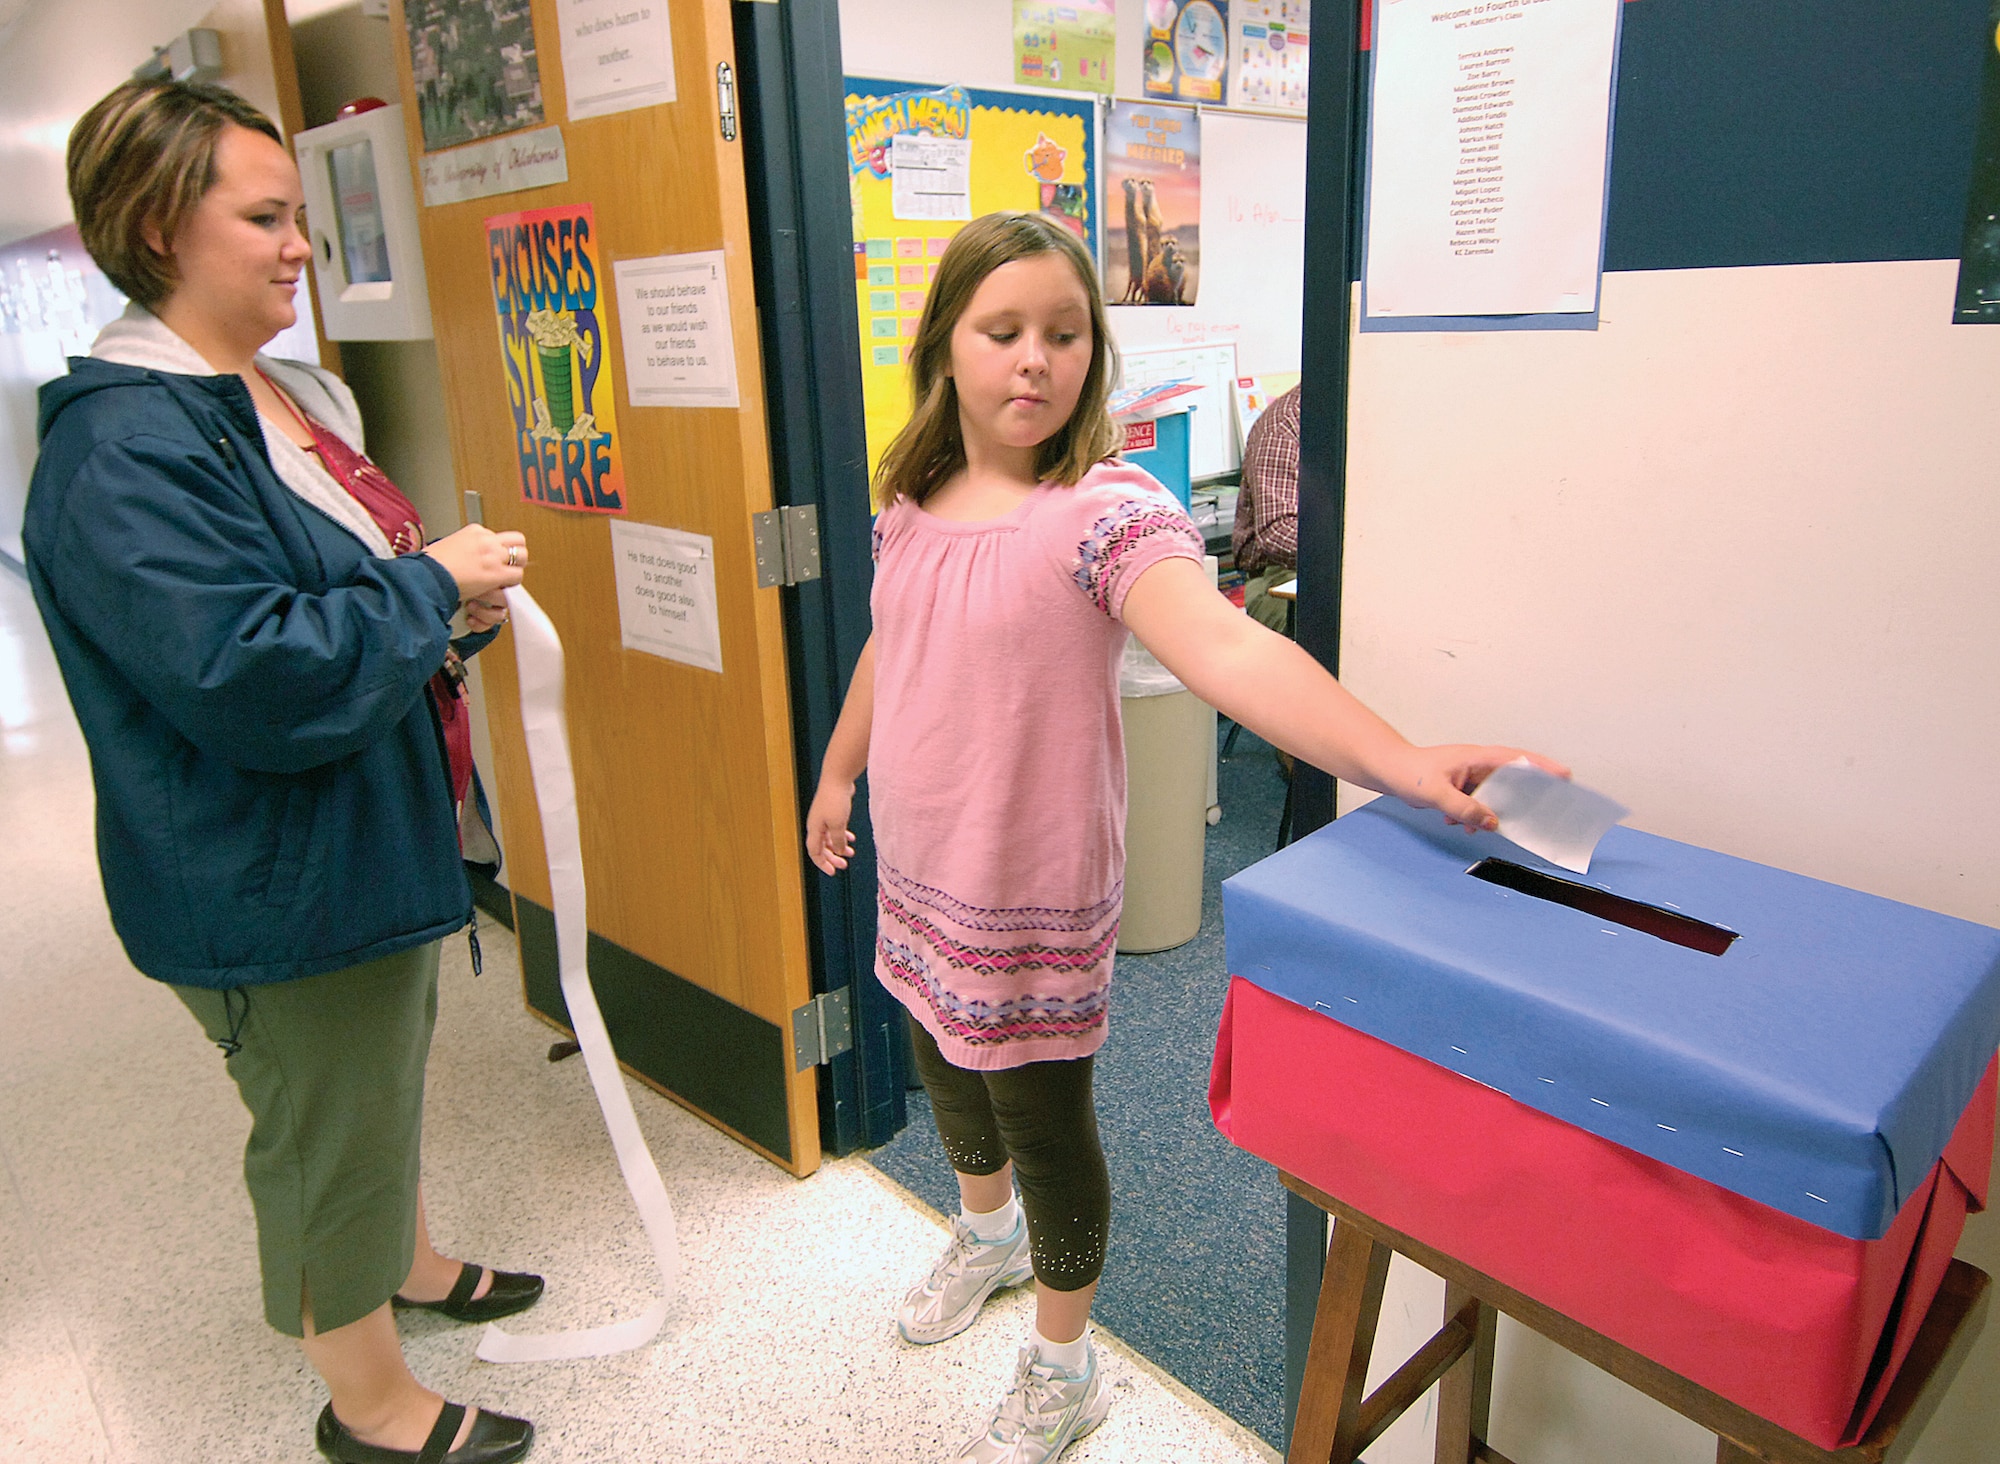 Tinker Elementary School  fourth-grader Brianna Zenzen casts her vote Oct. 30 for president as teacher Cindy Yarnell readies an “I voted” sticker for the student. Many students had strong opinions about their presidential hopeful. Some students had watched every debate, cited reasons for their choices, often picking a candidate opposite their parents’ favorite. When the votes were tallied, Barack Obama came out the winner. (Air Force photo/Margo Wright)